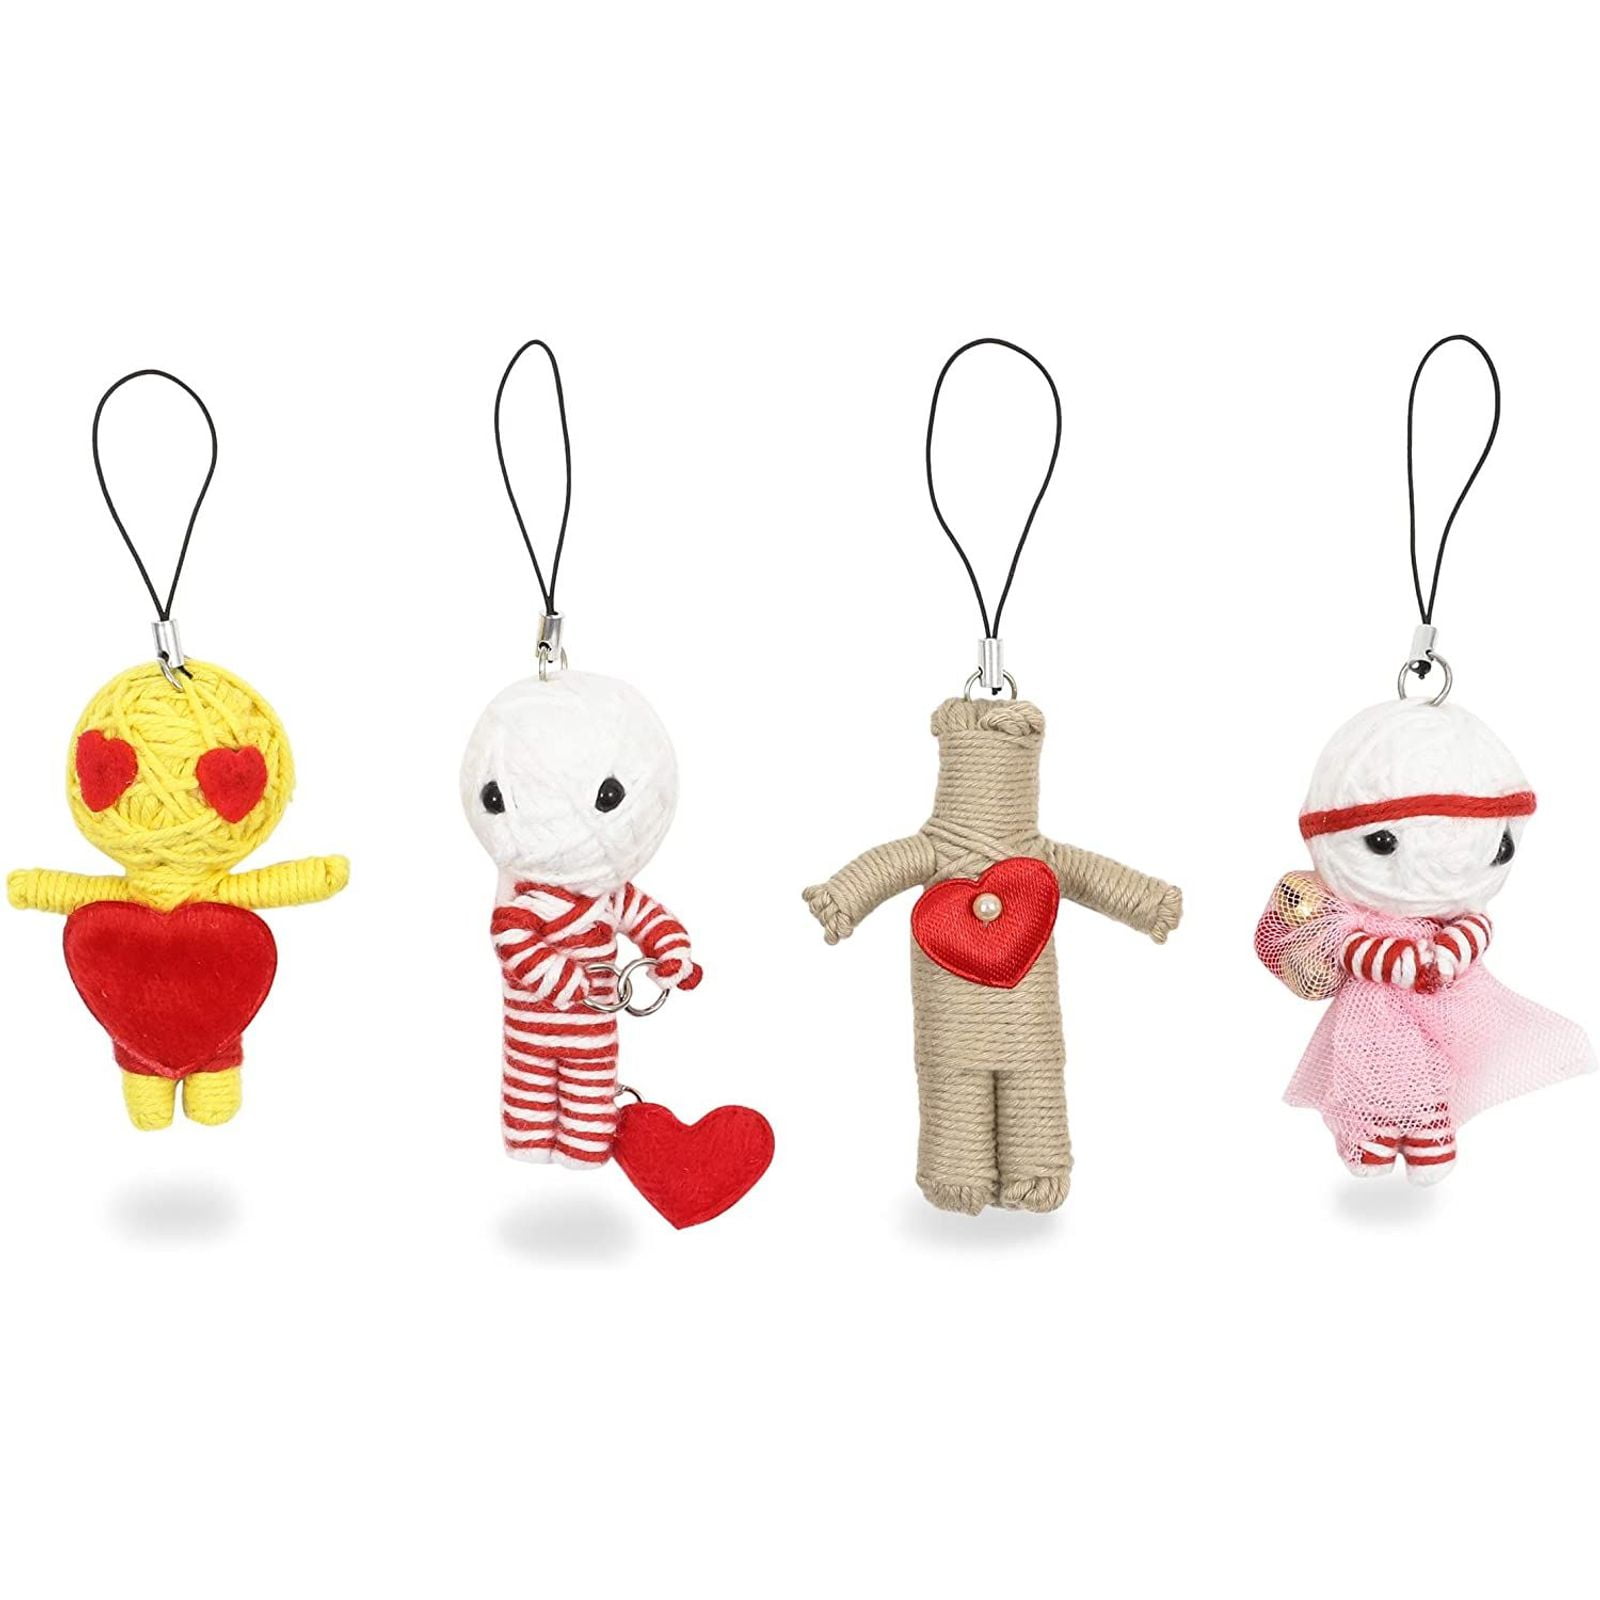 2 Voodoo String Doll Charter Keychain Keyring Ornament Accessory Gift Set No 